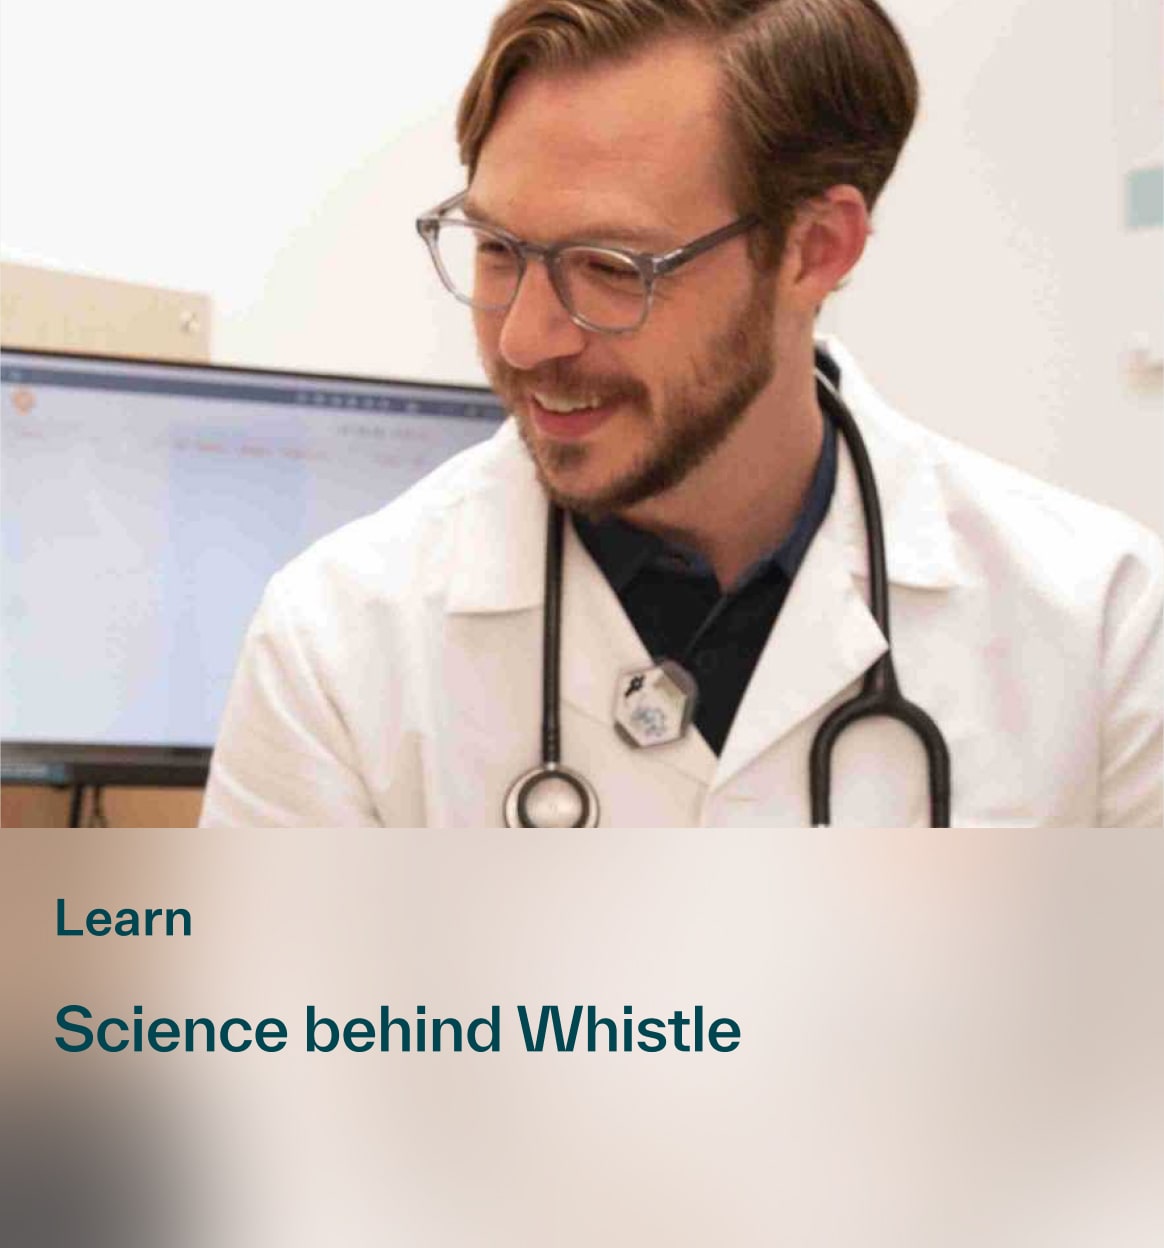 Learn about the science behind Whistle